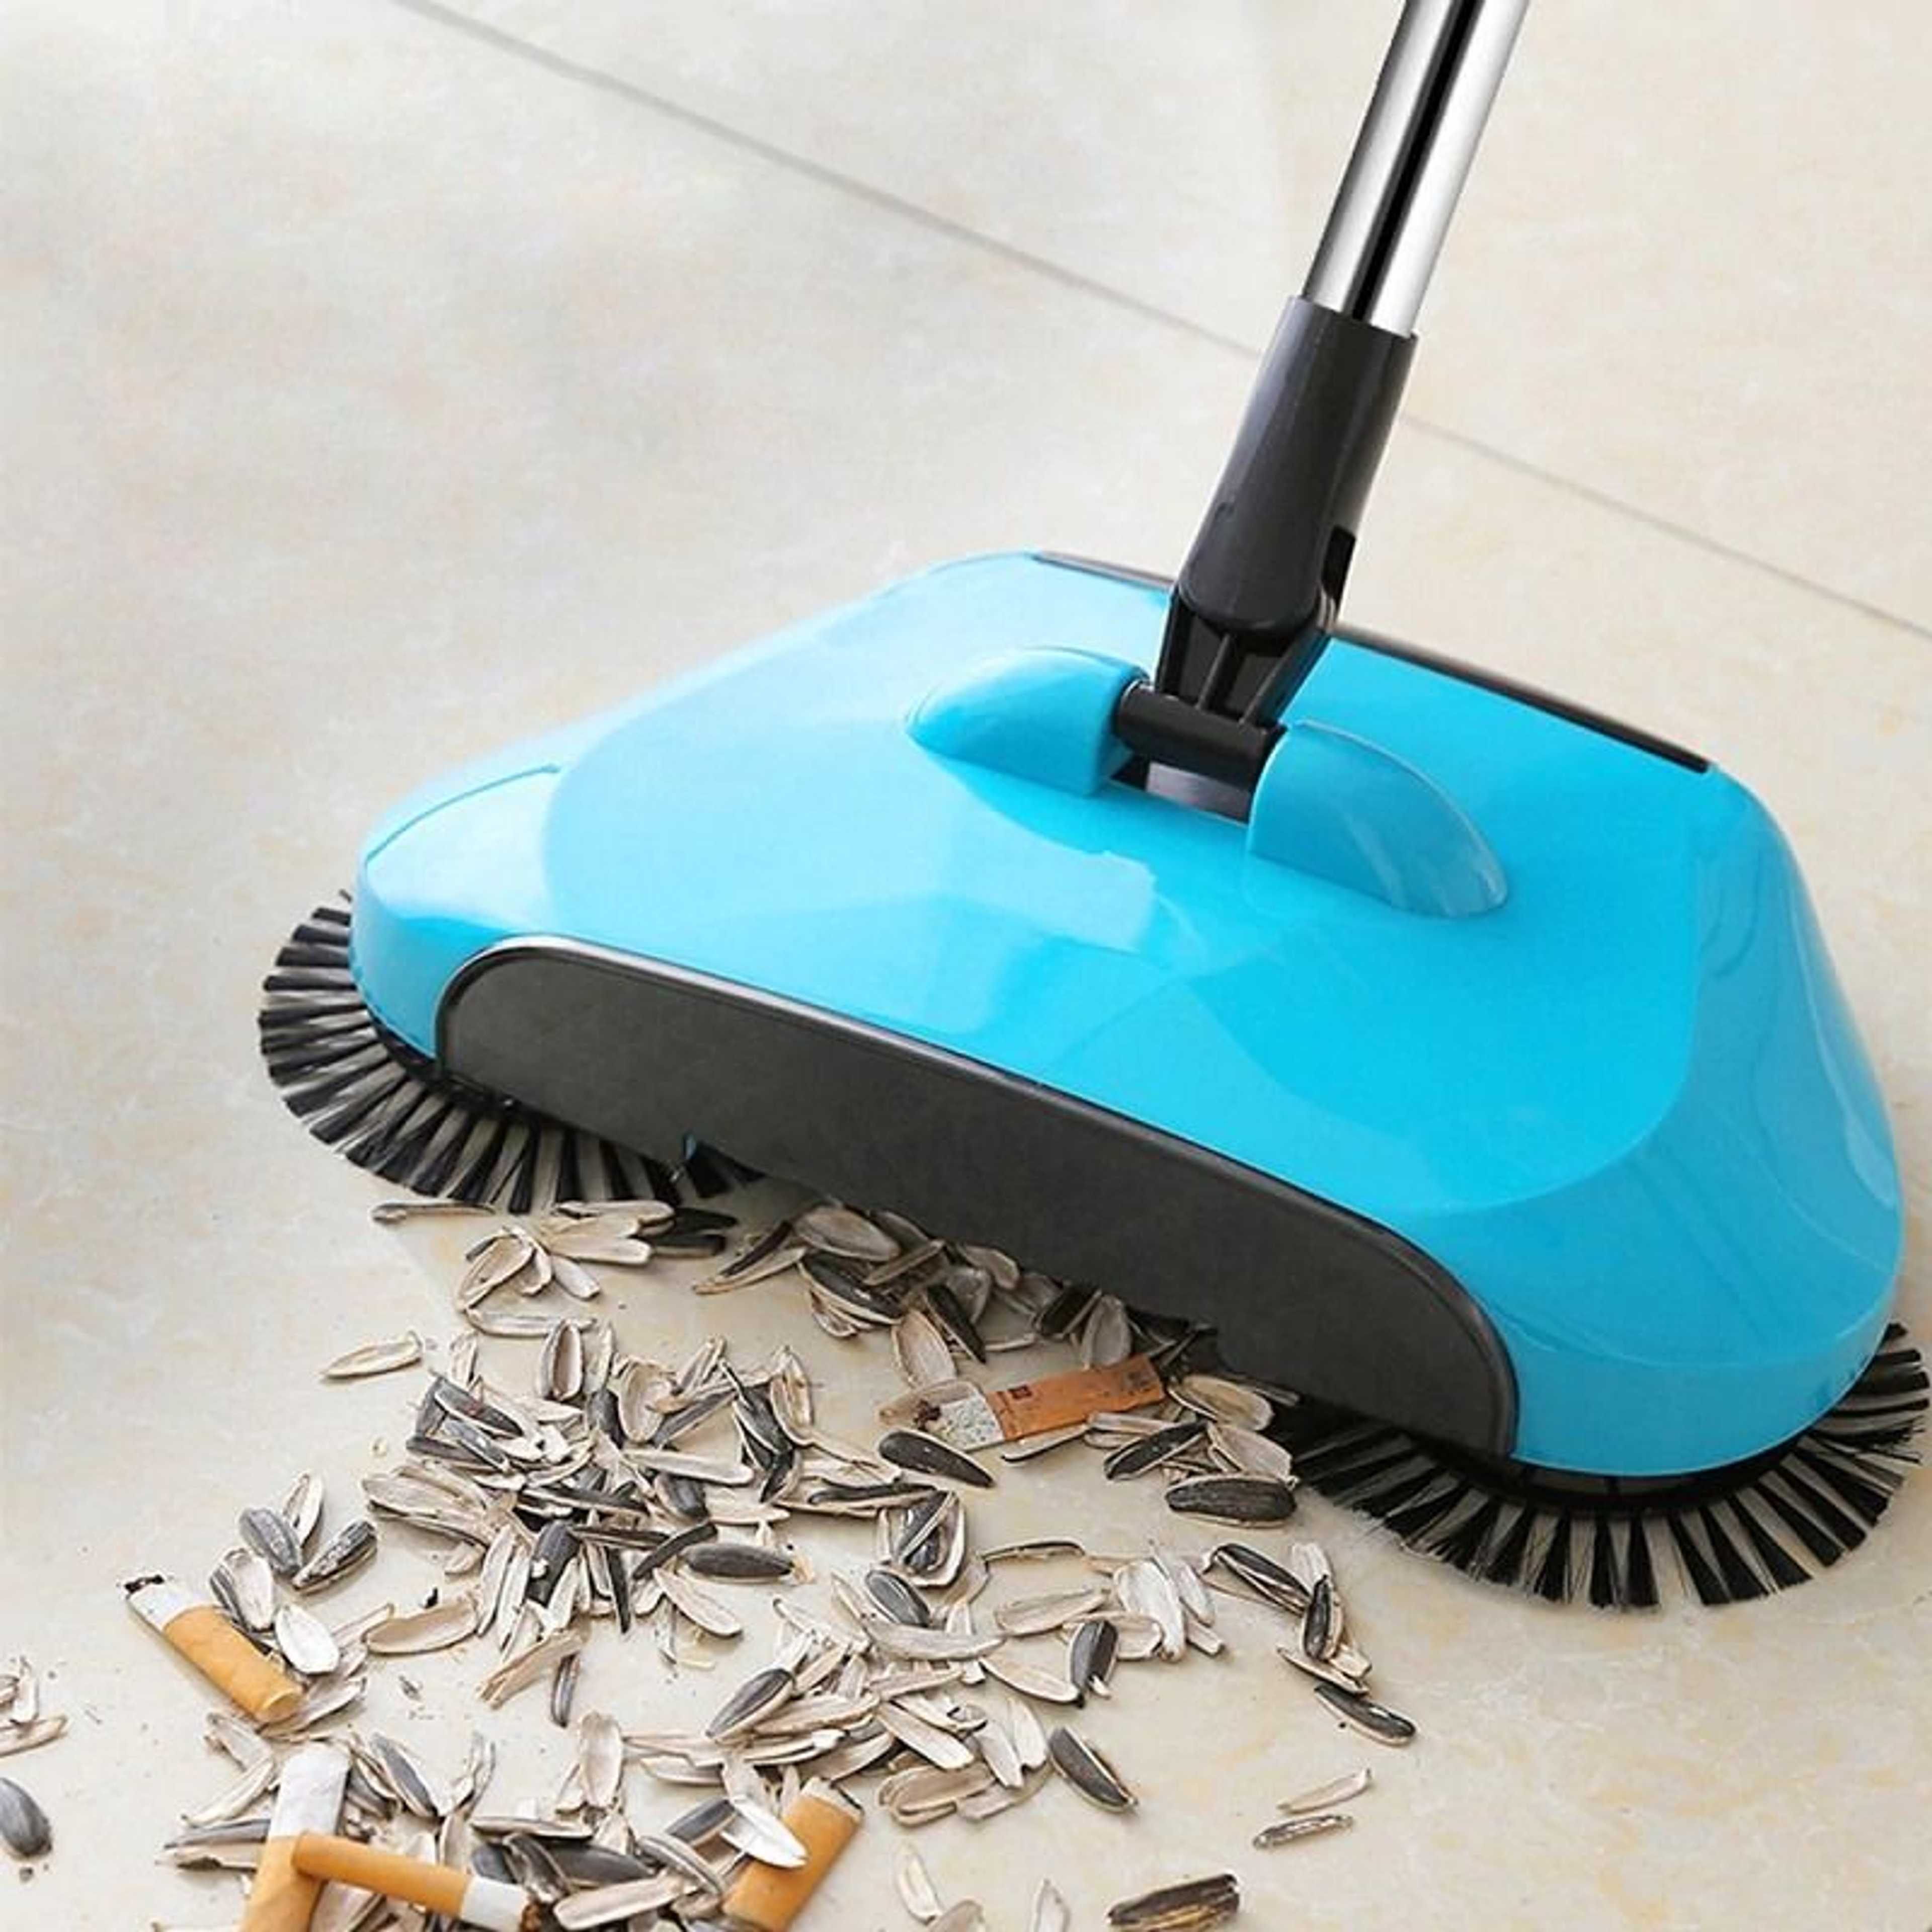 Stainless Steel Hand Push Sweepers Sweeping Machine Magic Broom Household Cleaning Tool